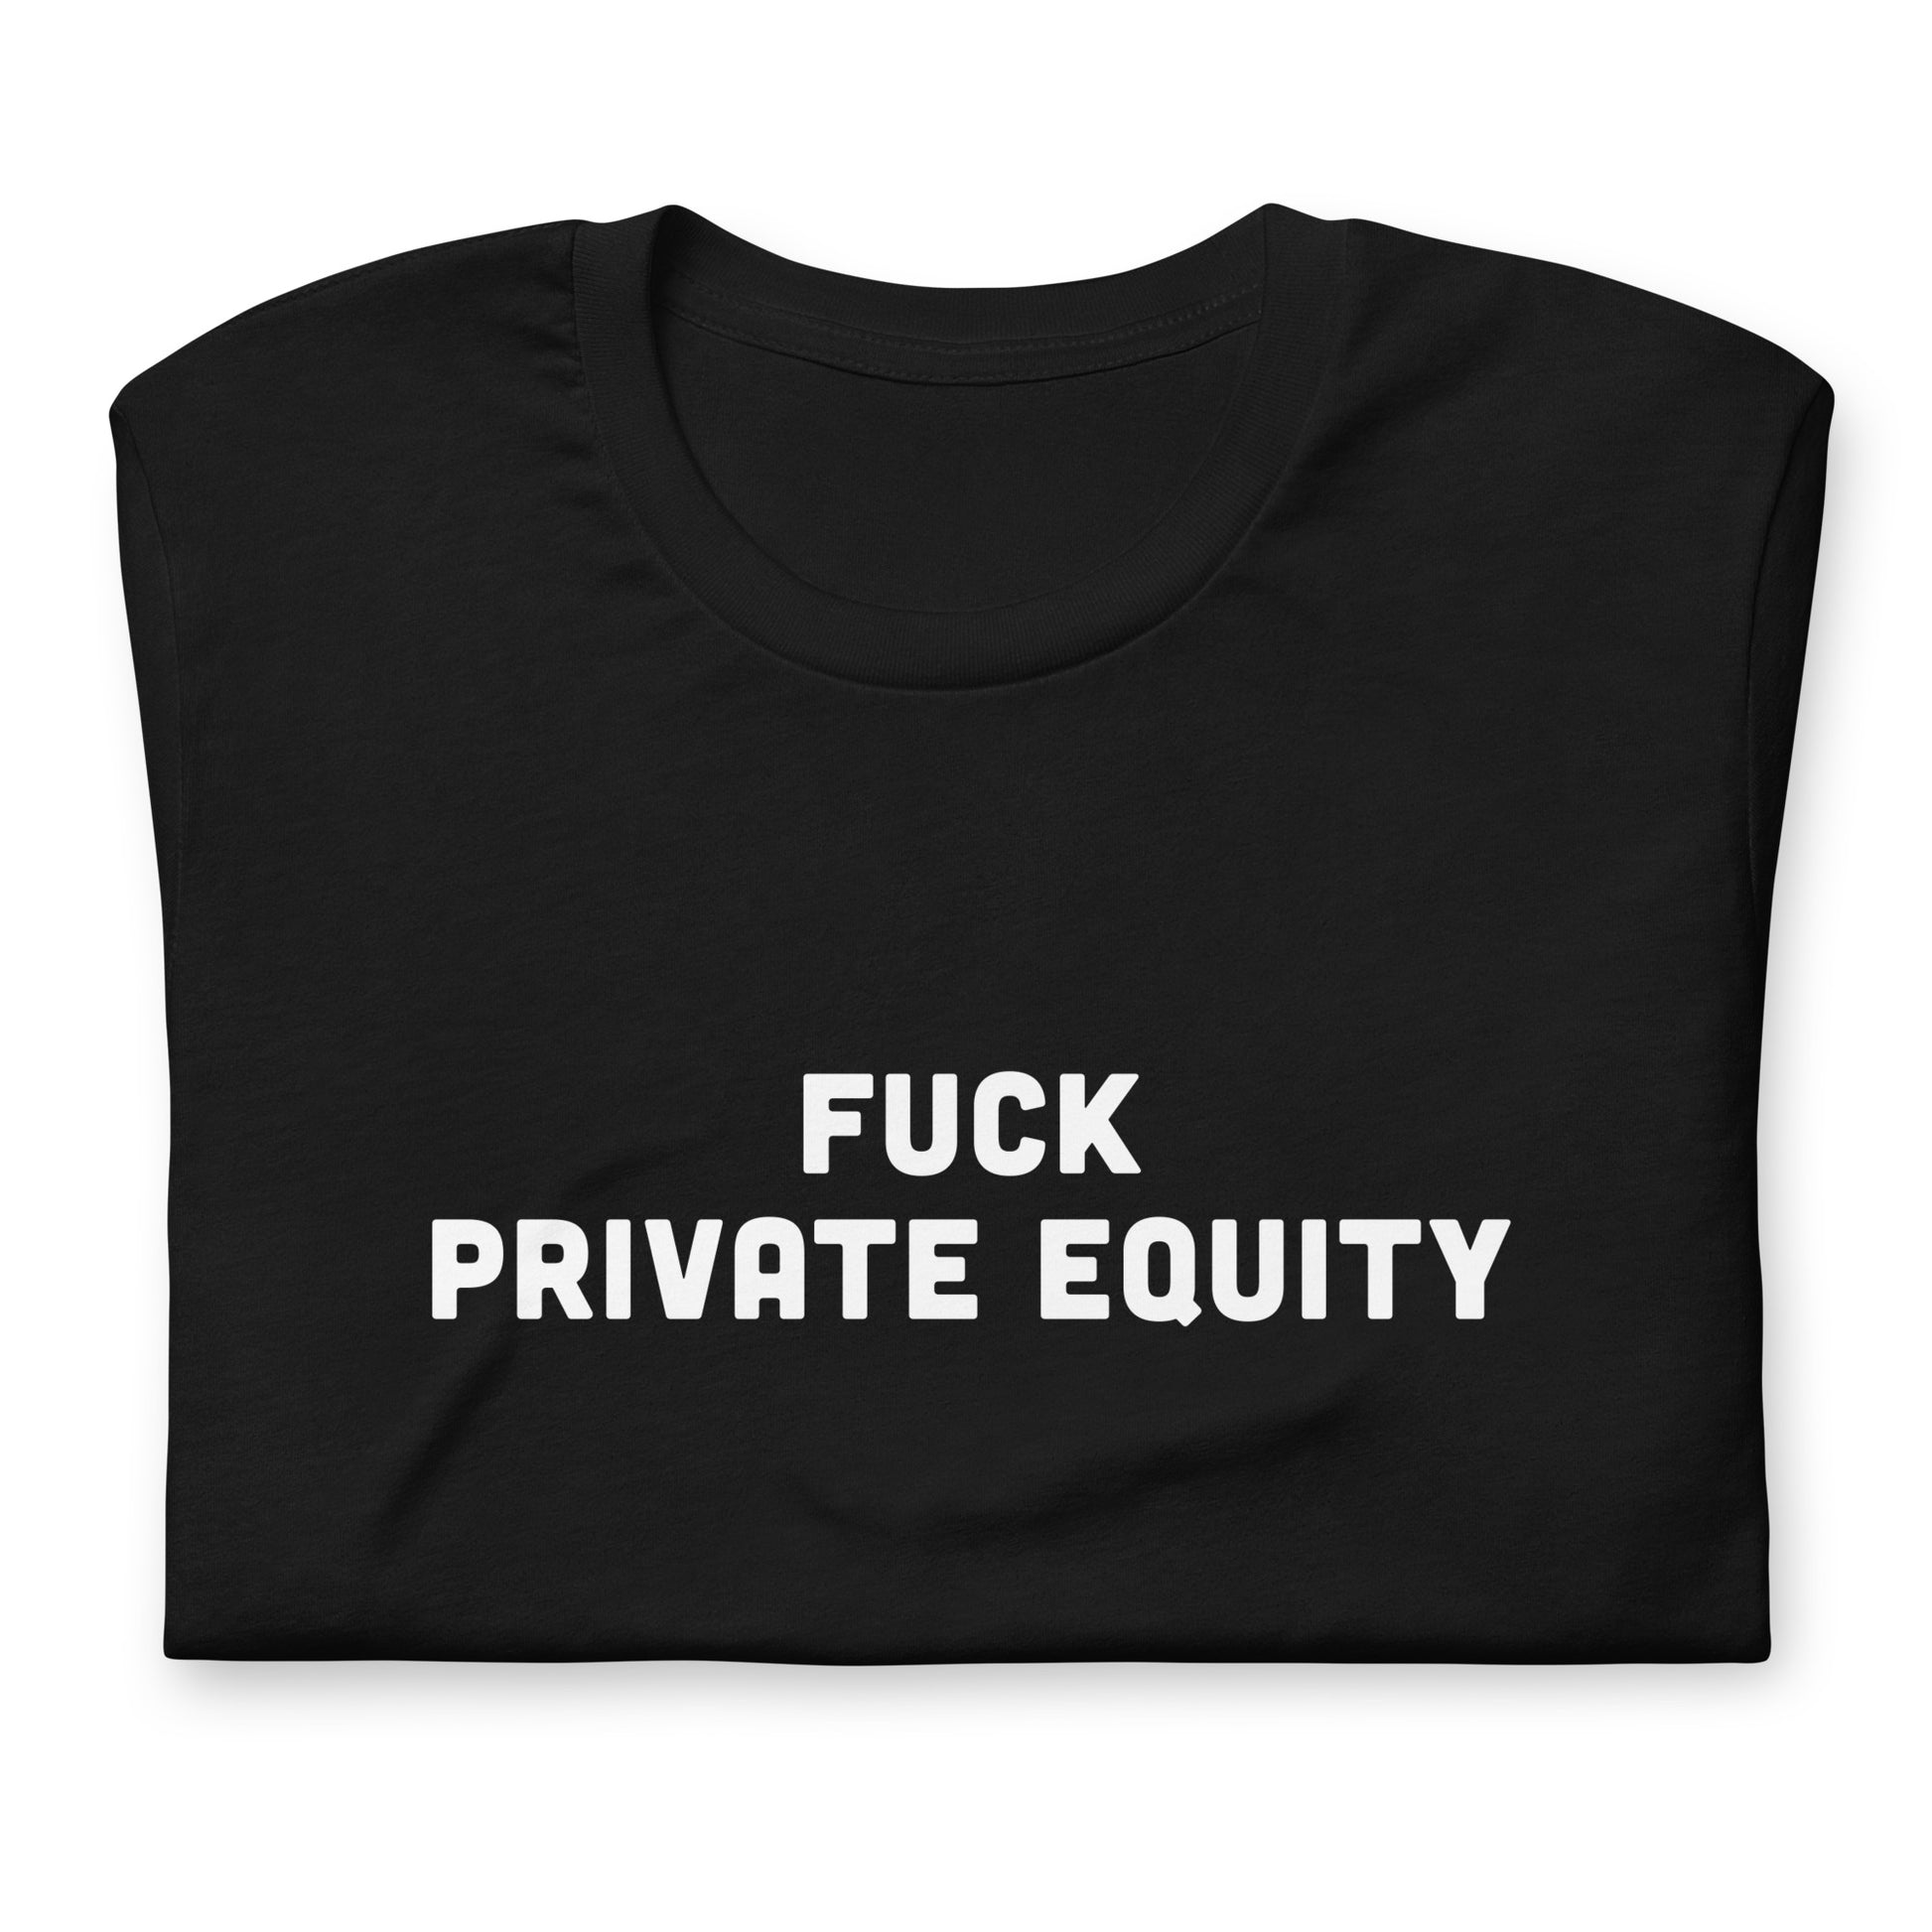 Fuck Private Equity T-Shirt Size M Color Black